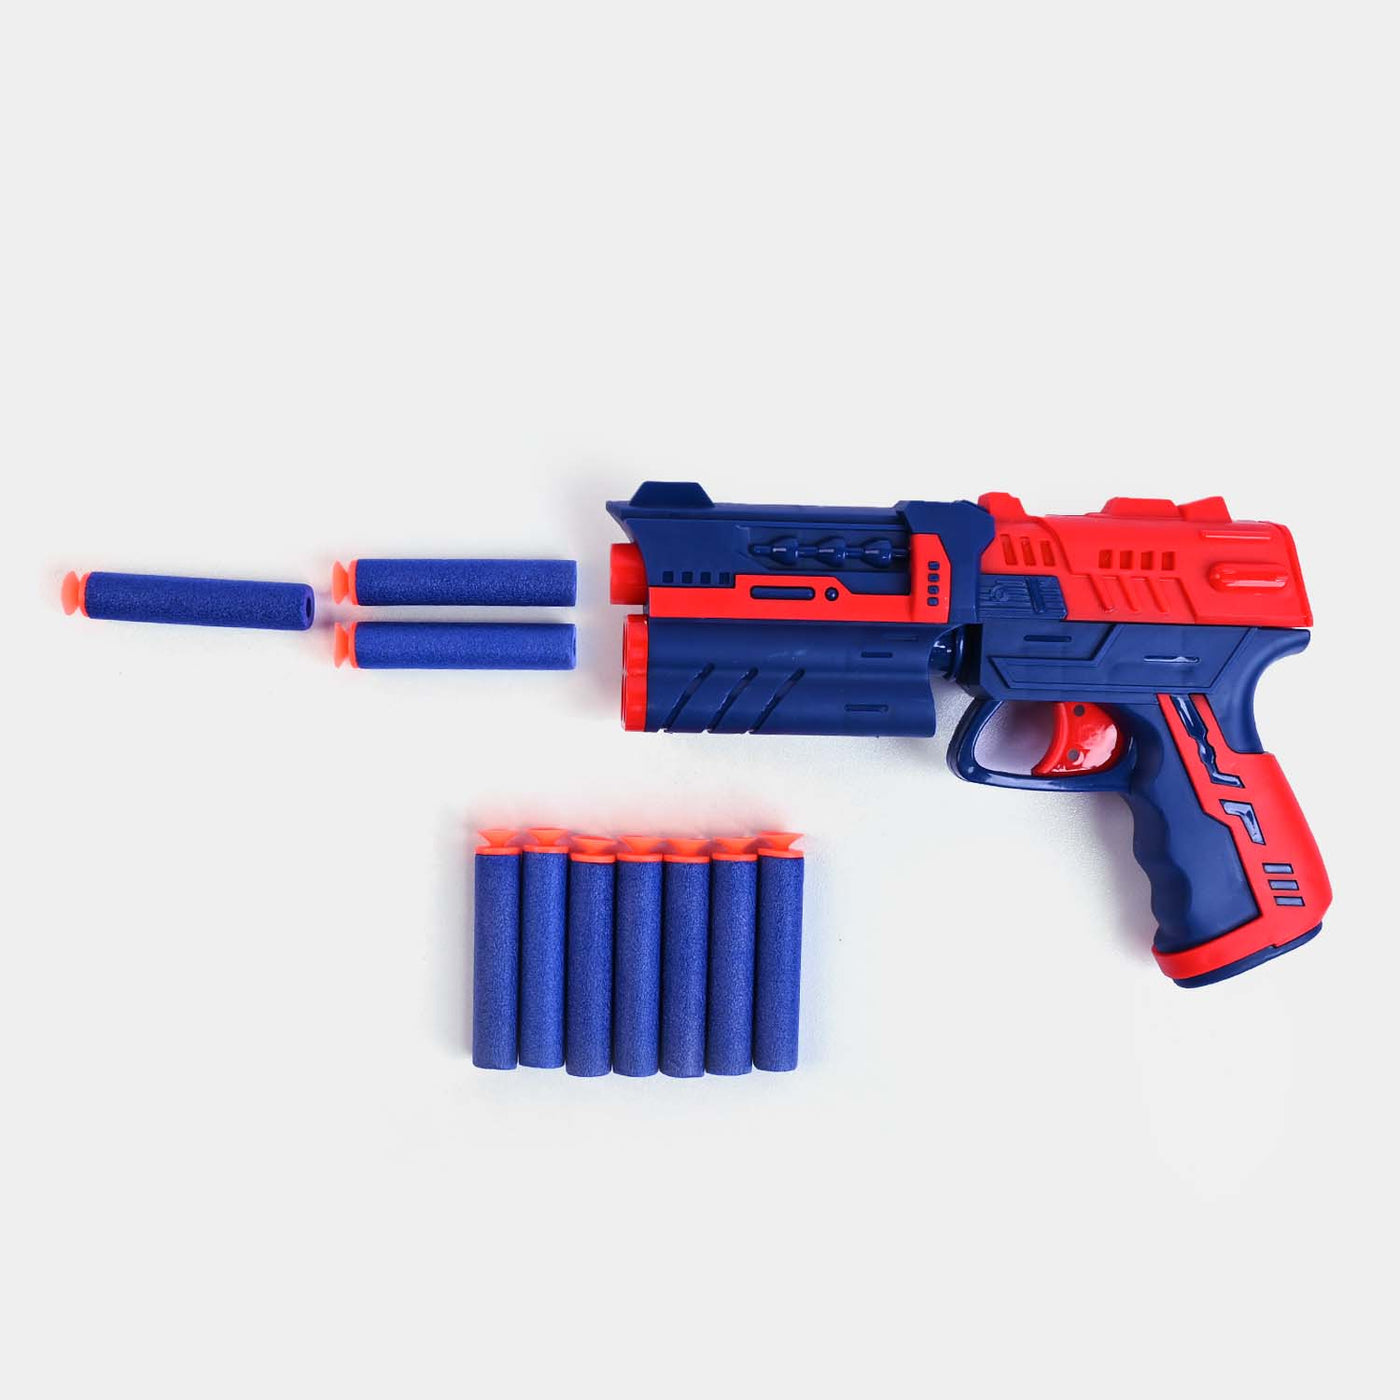 Soft Dart Amazing Target Launcher Toy For Kids